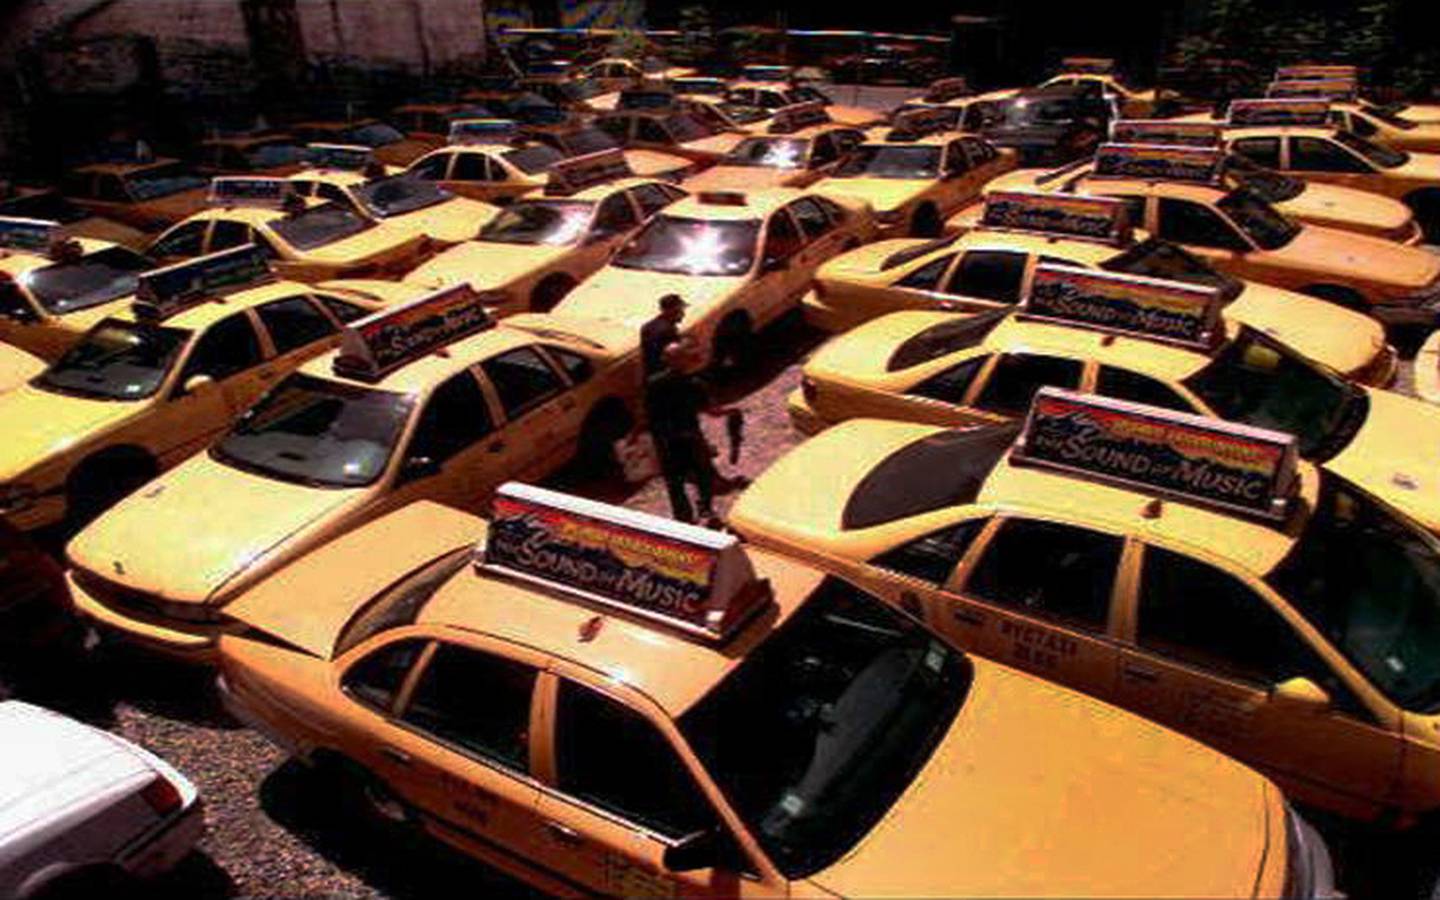 Yellow taxi fleet parked in lot, New York City, photo on black